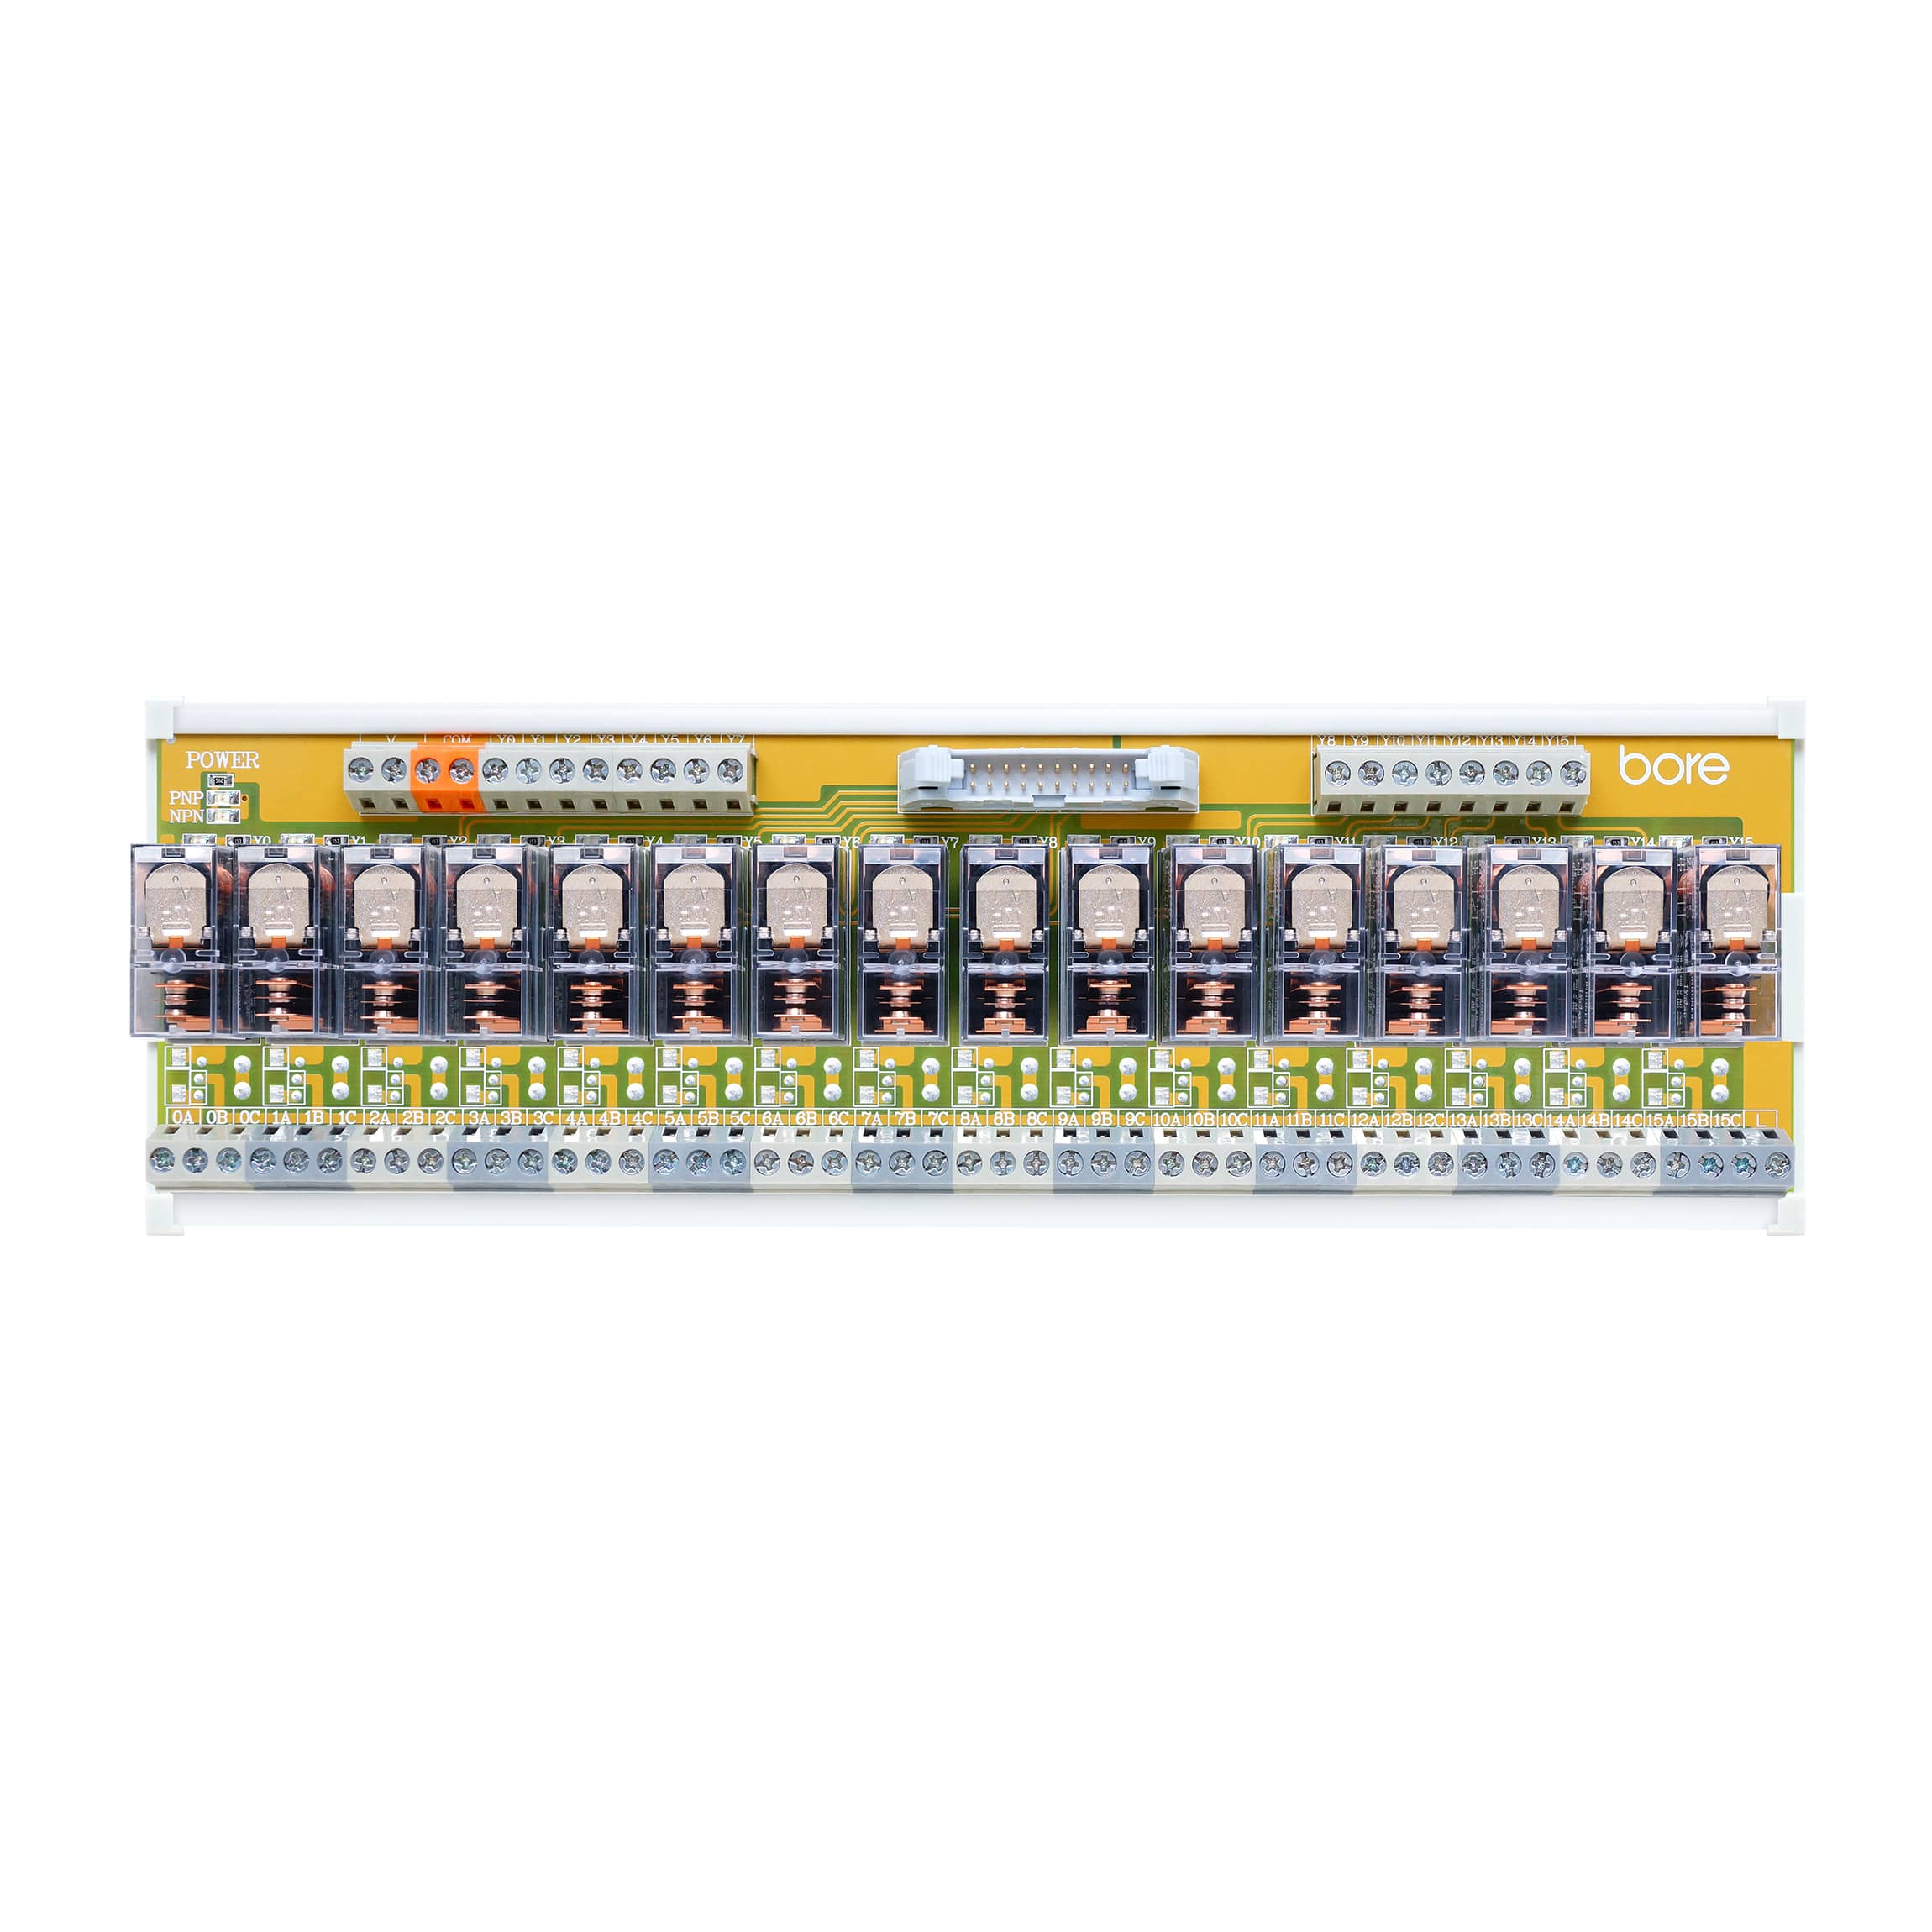 Products|Relay Module G2R-OR16